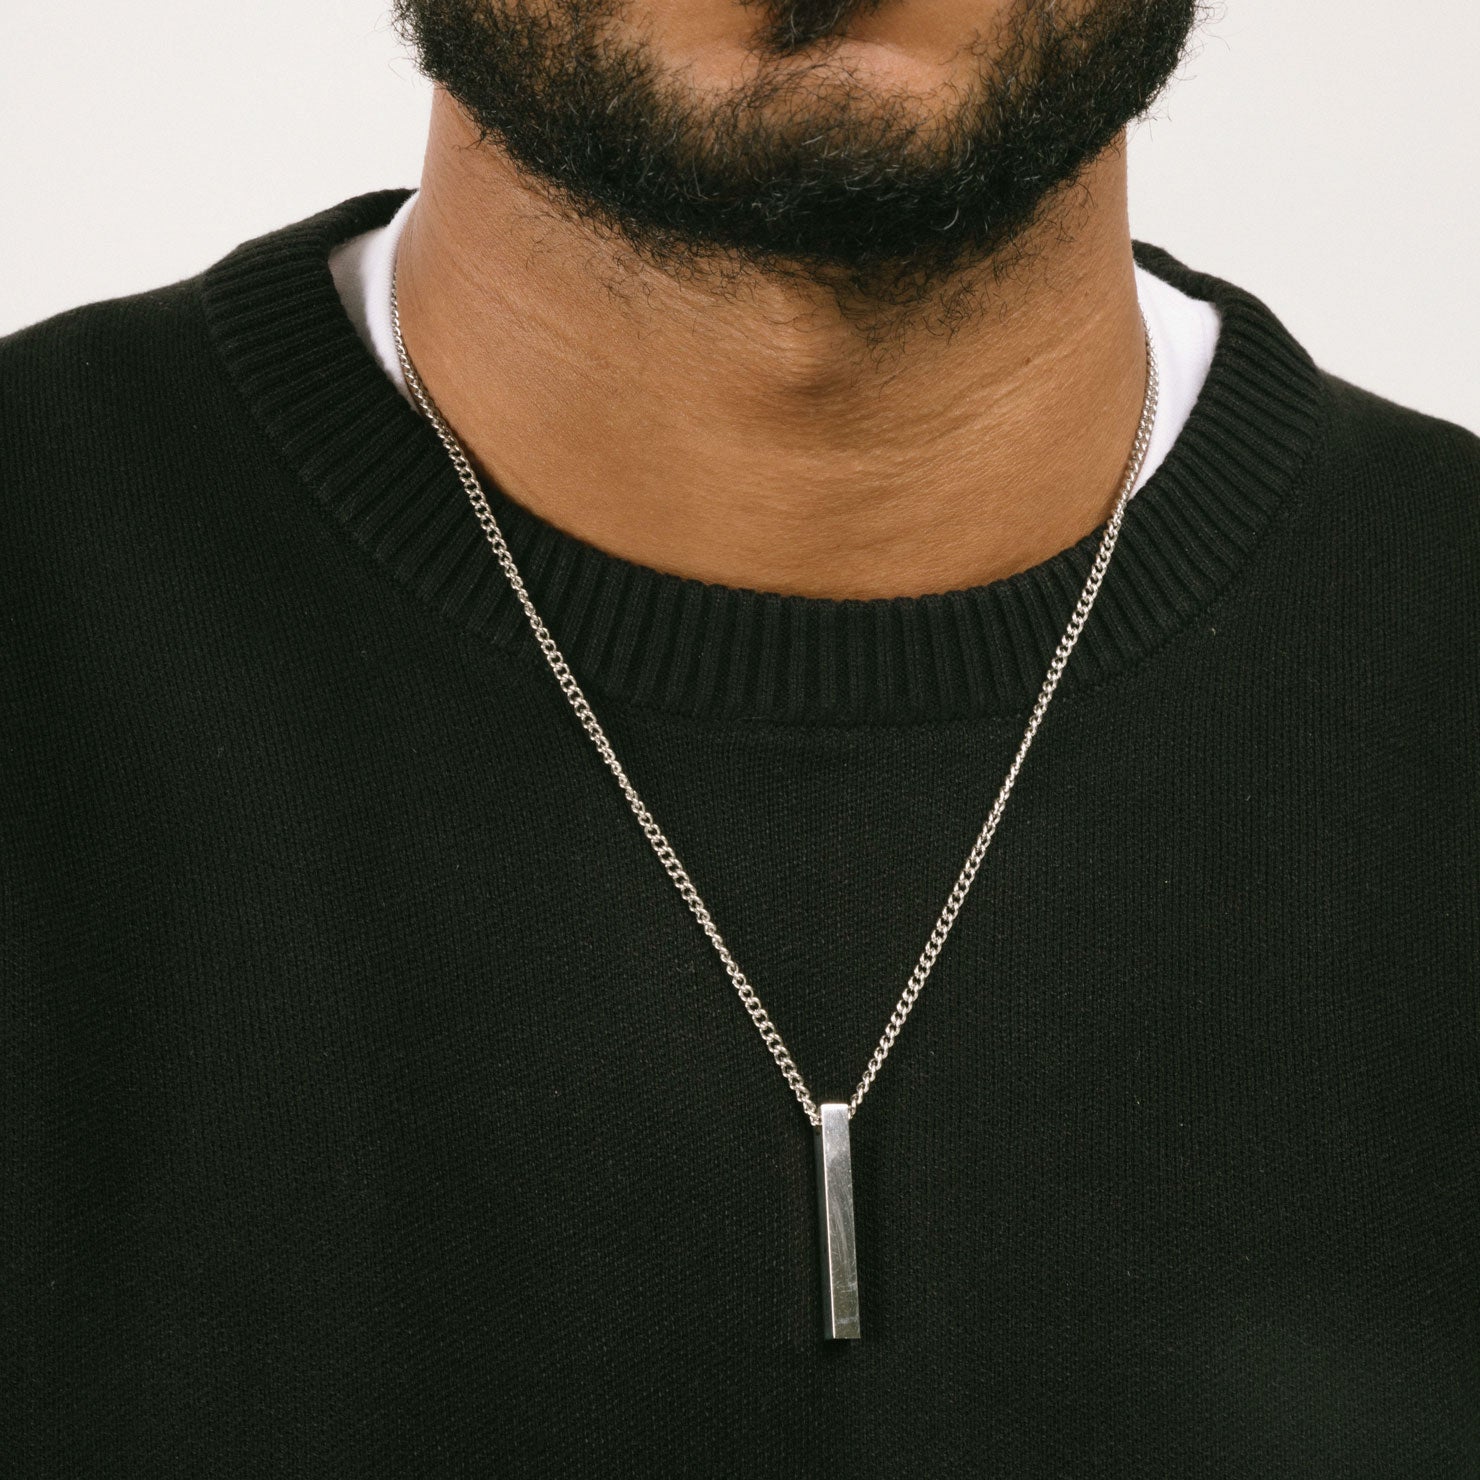 A model wearing the Bar Pendant Chain is crafted with corrosion-resistant Stainless Steel, making it durable, non-tarnish, and water-resistant.